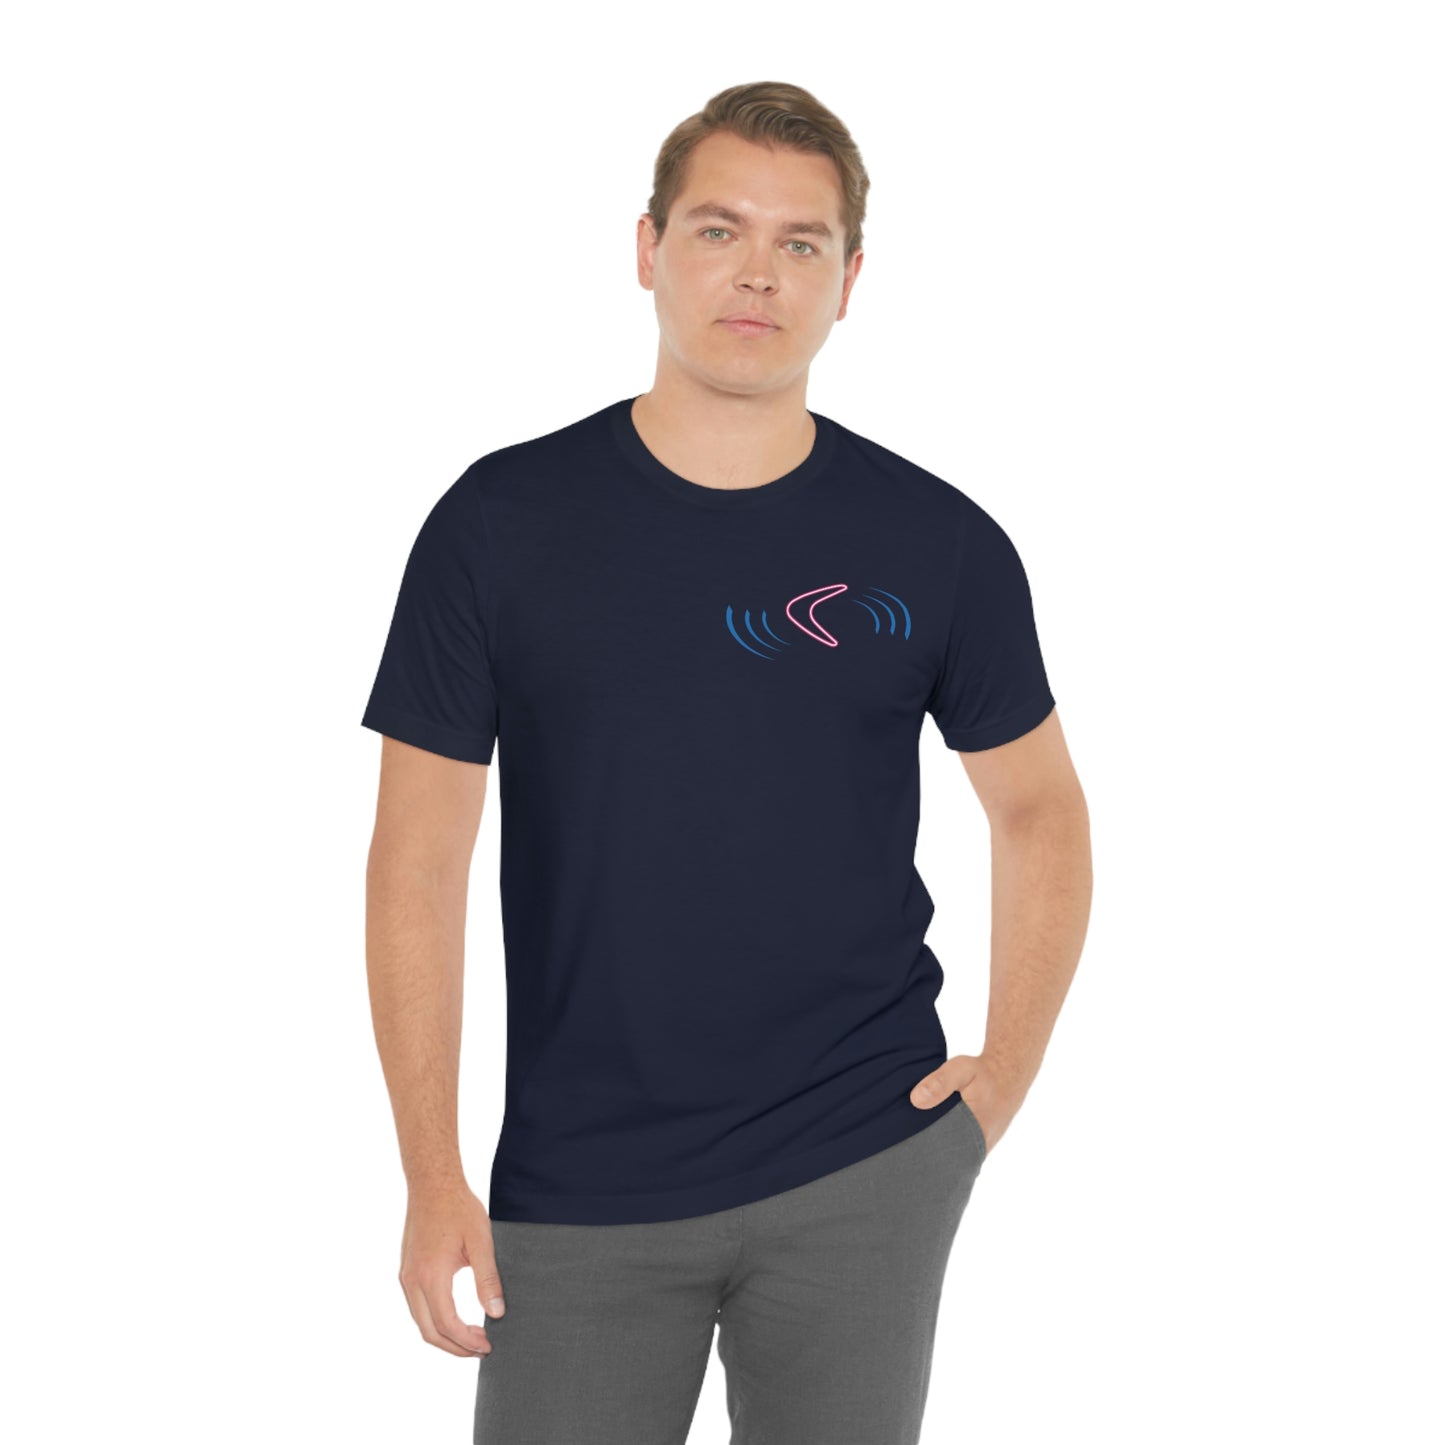 FLYING BOOMERANG  - Navy T-Shirt with vibrant, dynamic flying boomerang design. Taken from the TEQNEON Radioactive collection.